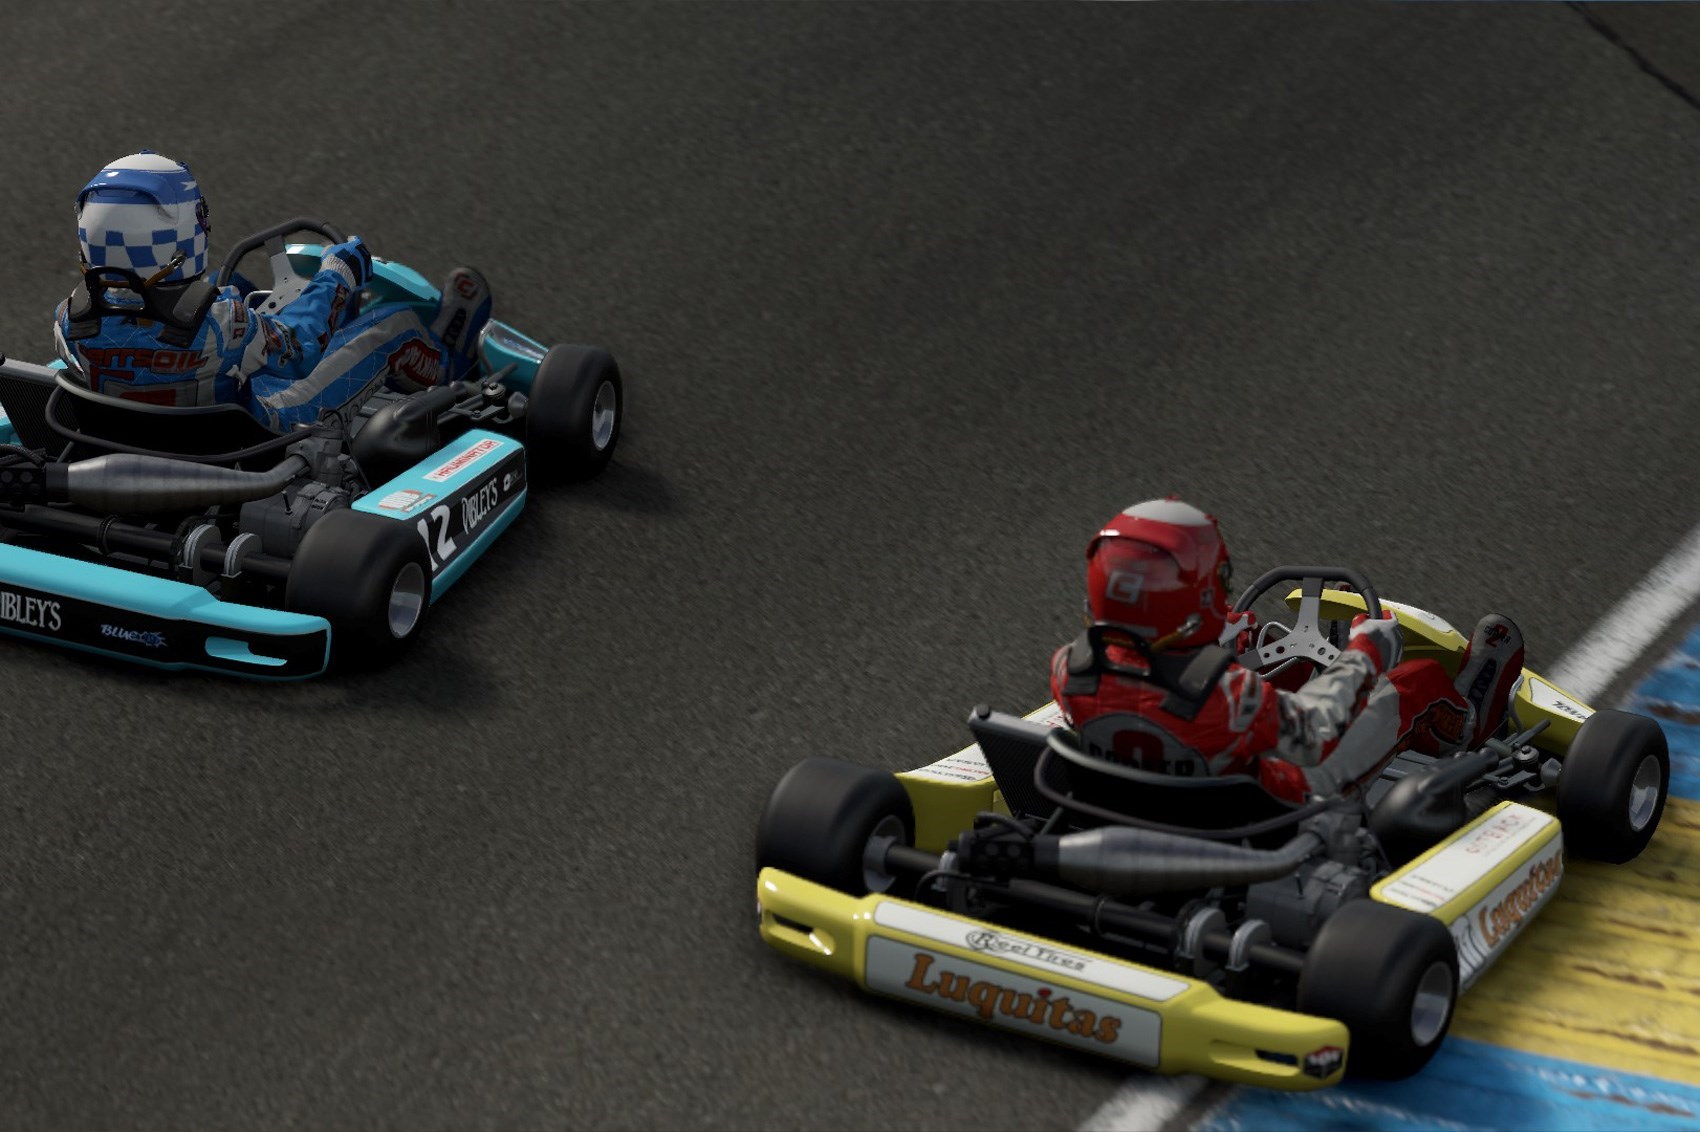 Project Cars car list, tracks and PC specs